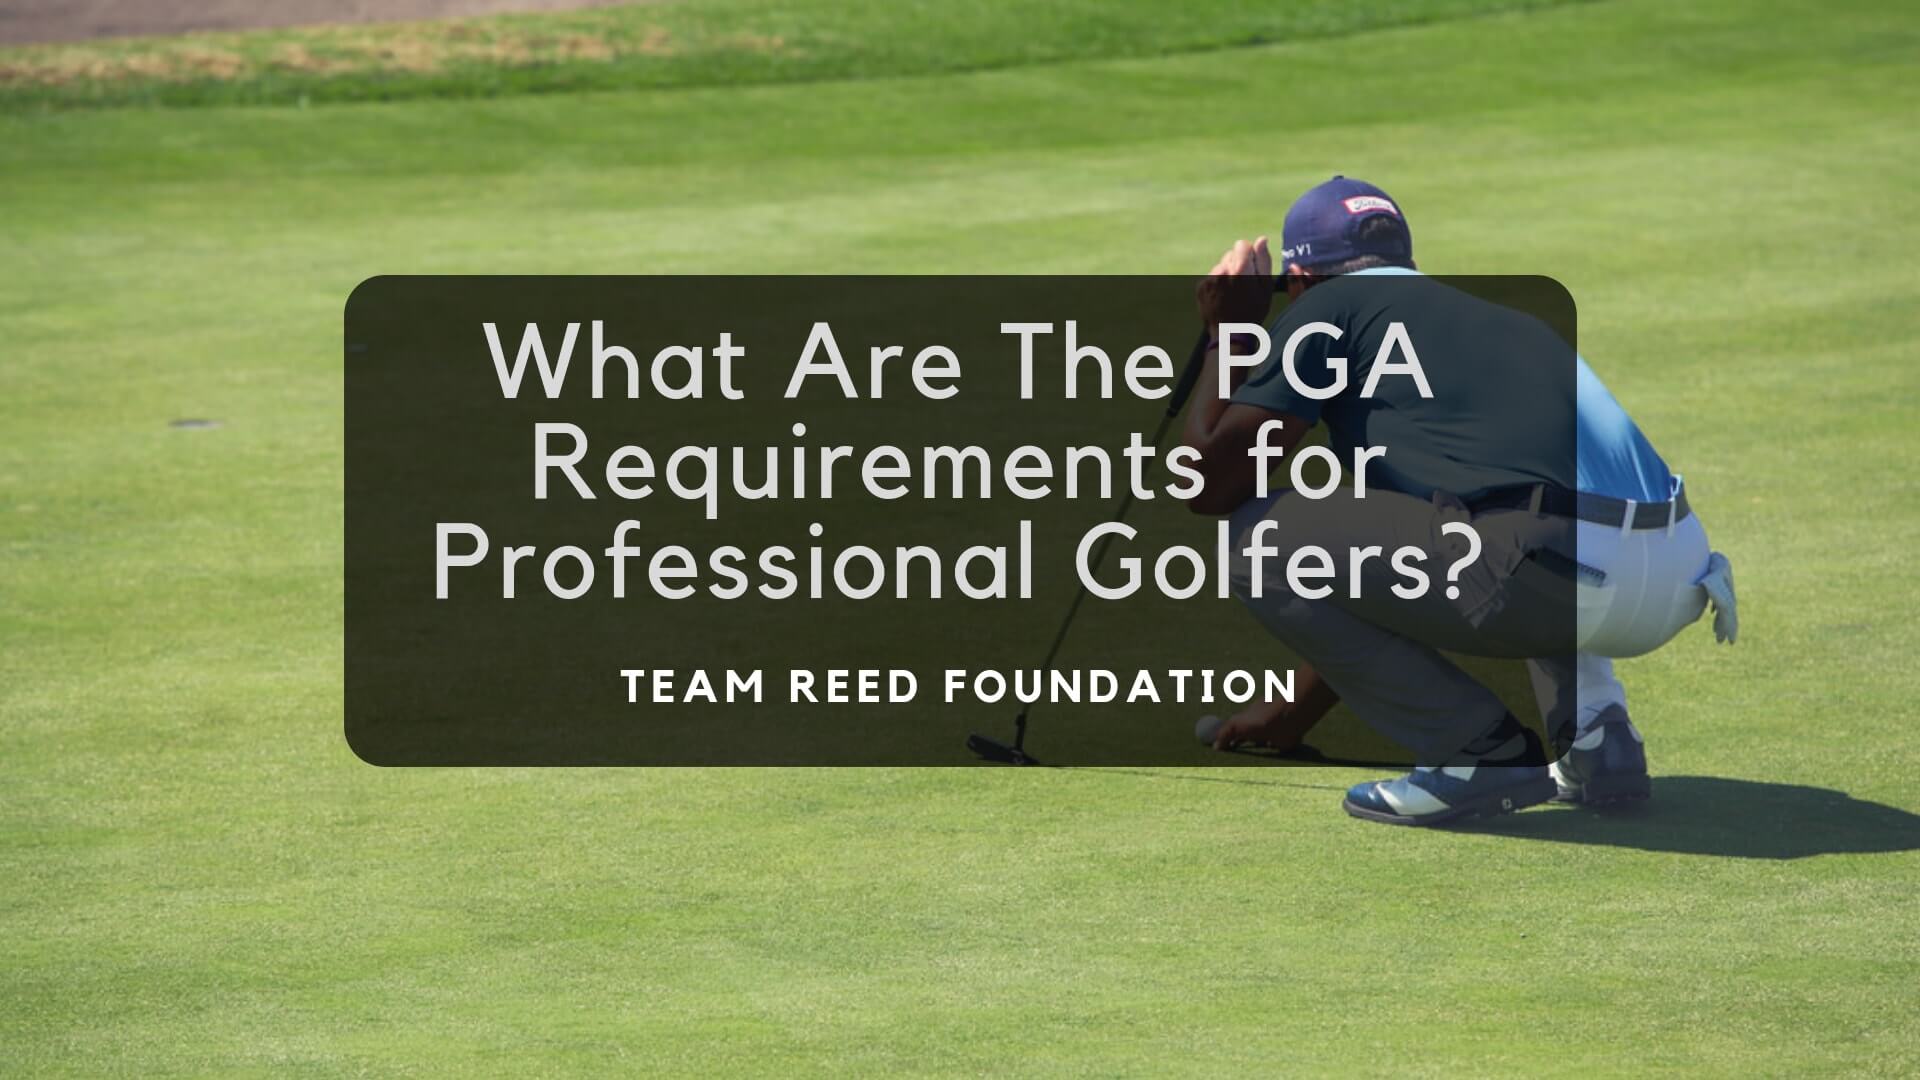 What Are The PGA Requirements For Professional Golfers?